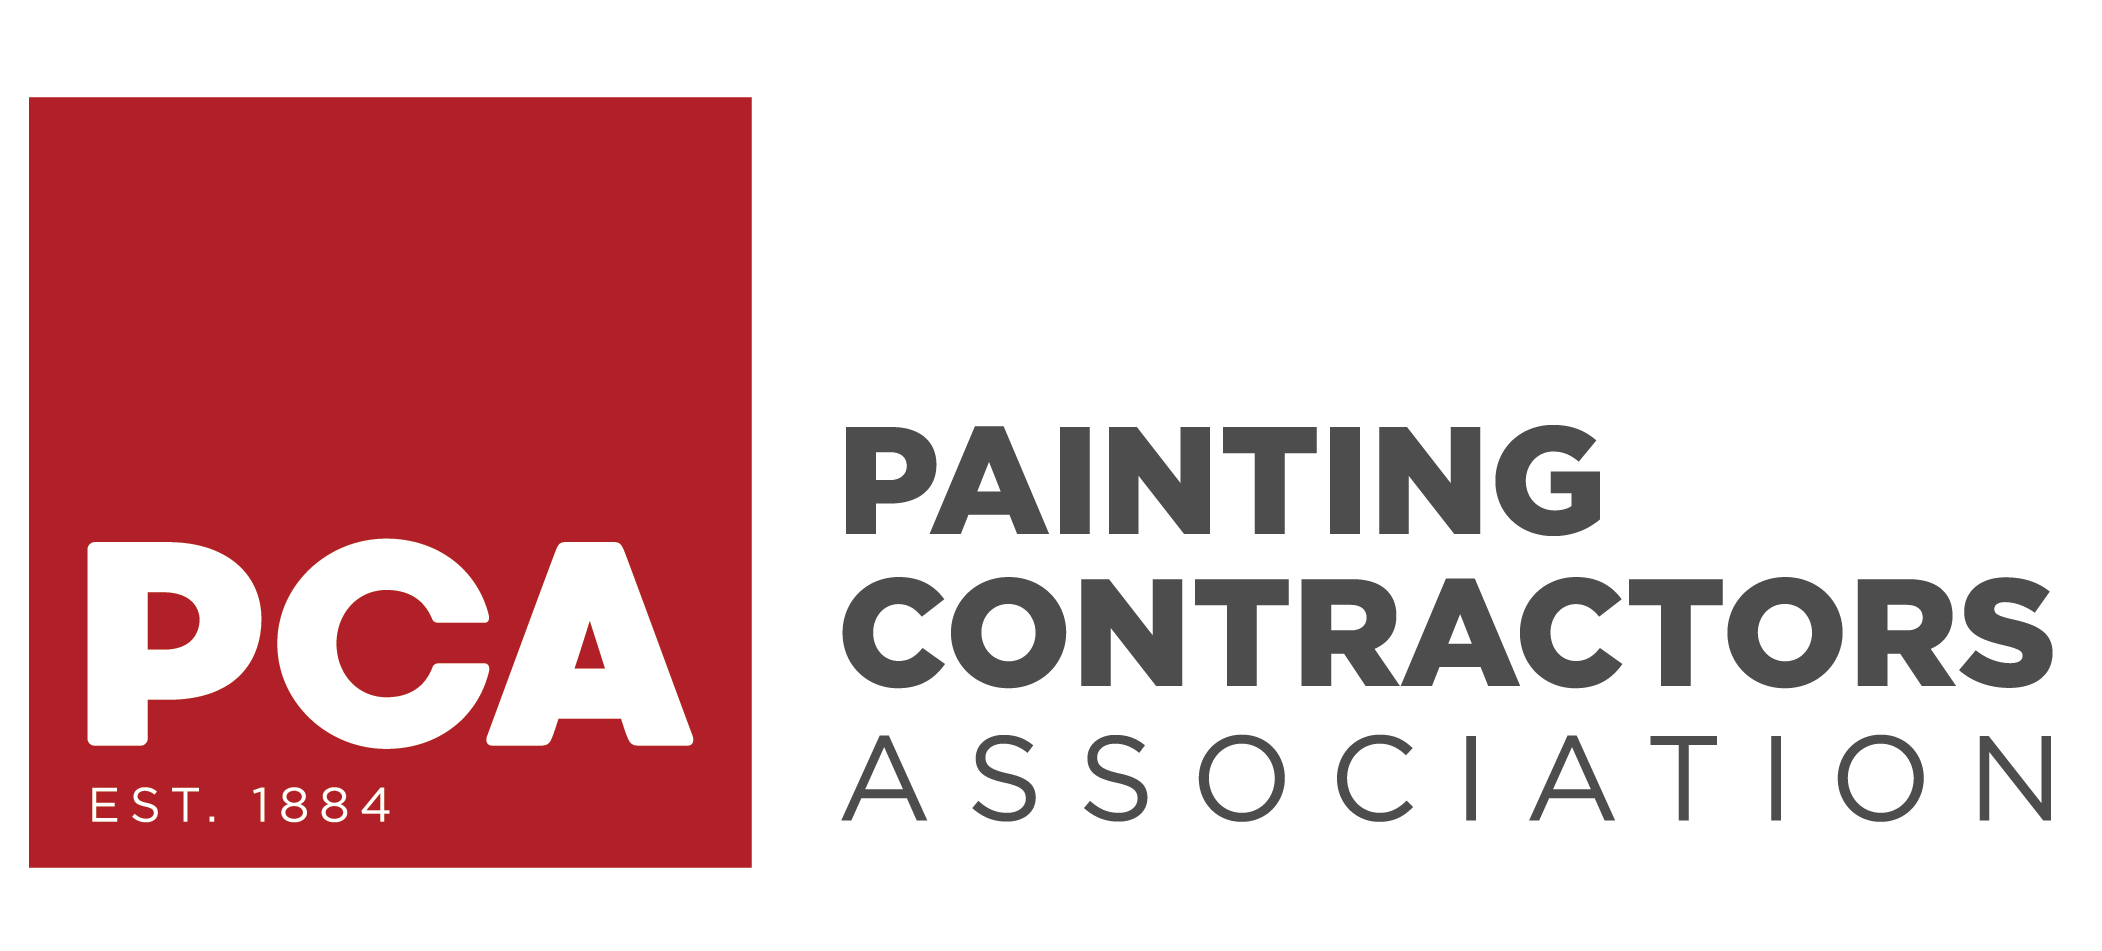 Red box logo for Painting Contractors Association